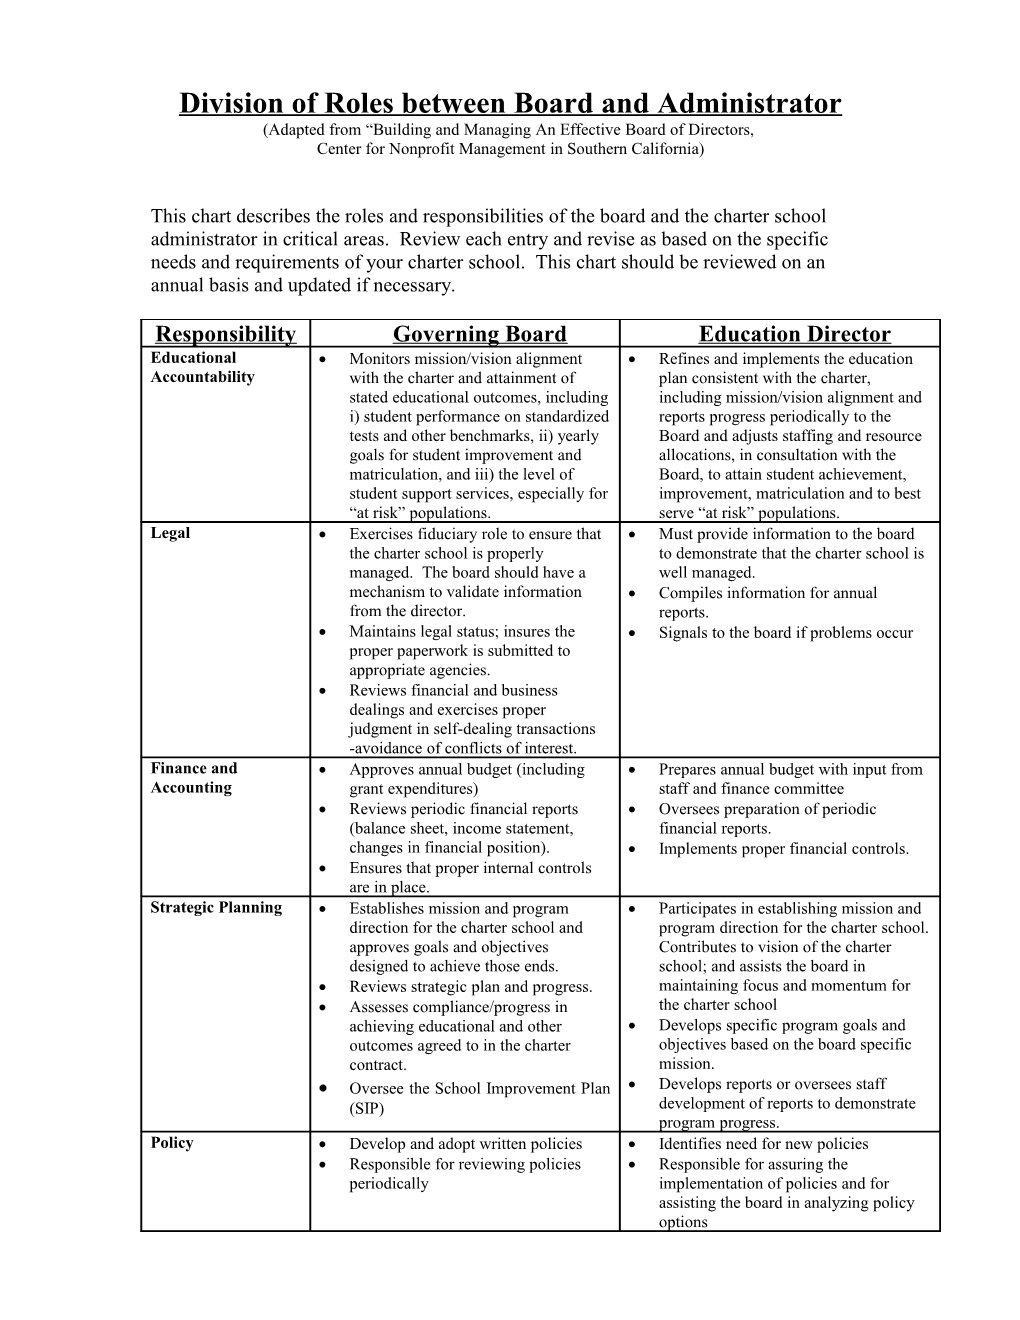 Division of Roles Between Board and Administrator